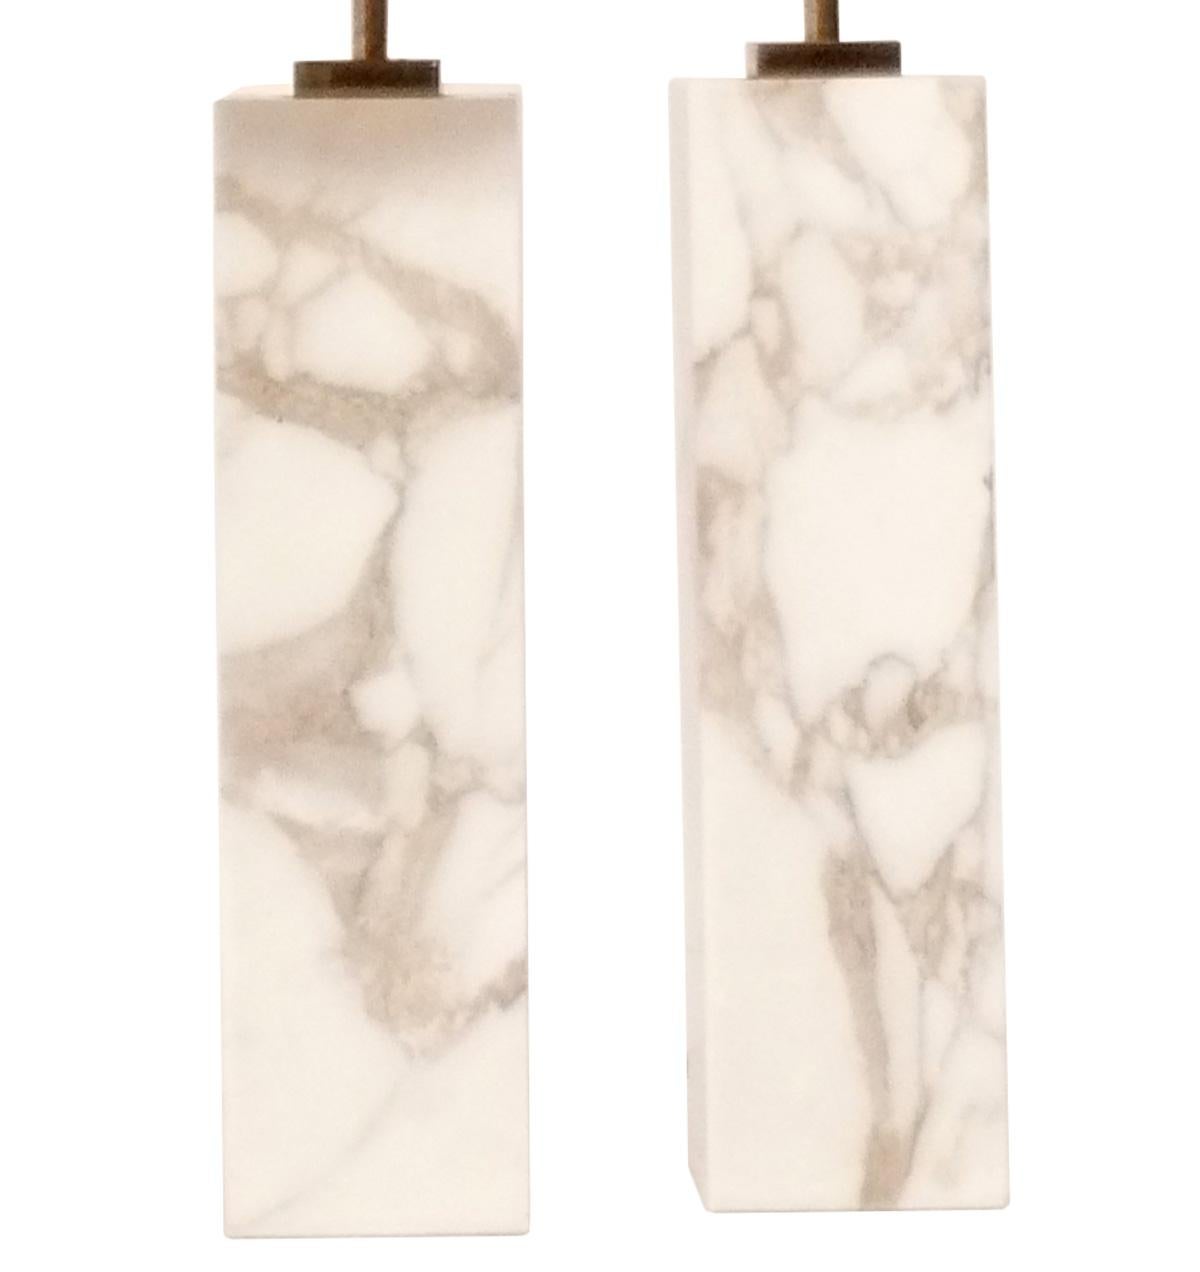 Pair of Clean Lined Marble Lamps, designed by T.H. Robsjohn Gibbings for Hansen, American, circa 1950s. These are vintage originals and retain their warm original patina to the brass fittings. The marble is a beautiful ivory color field with greige